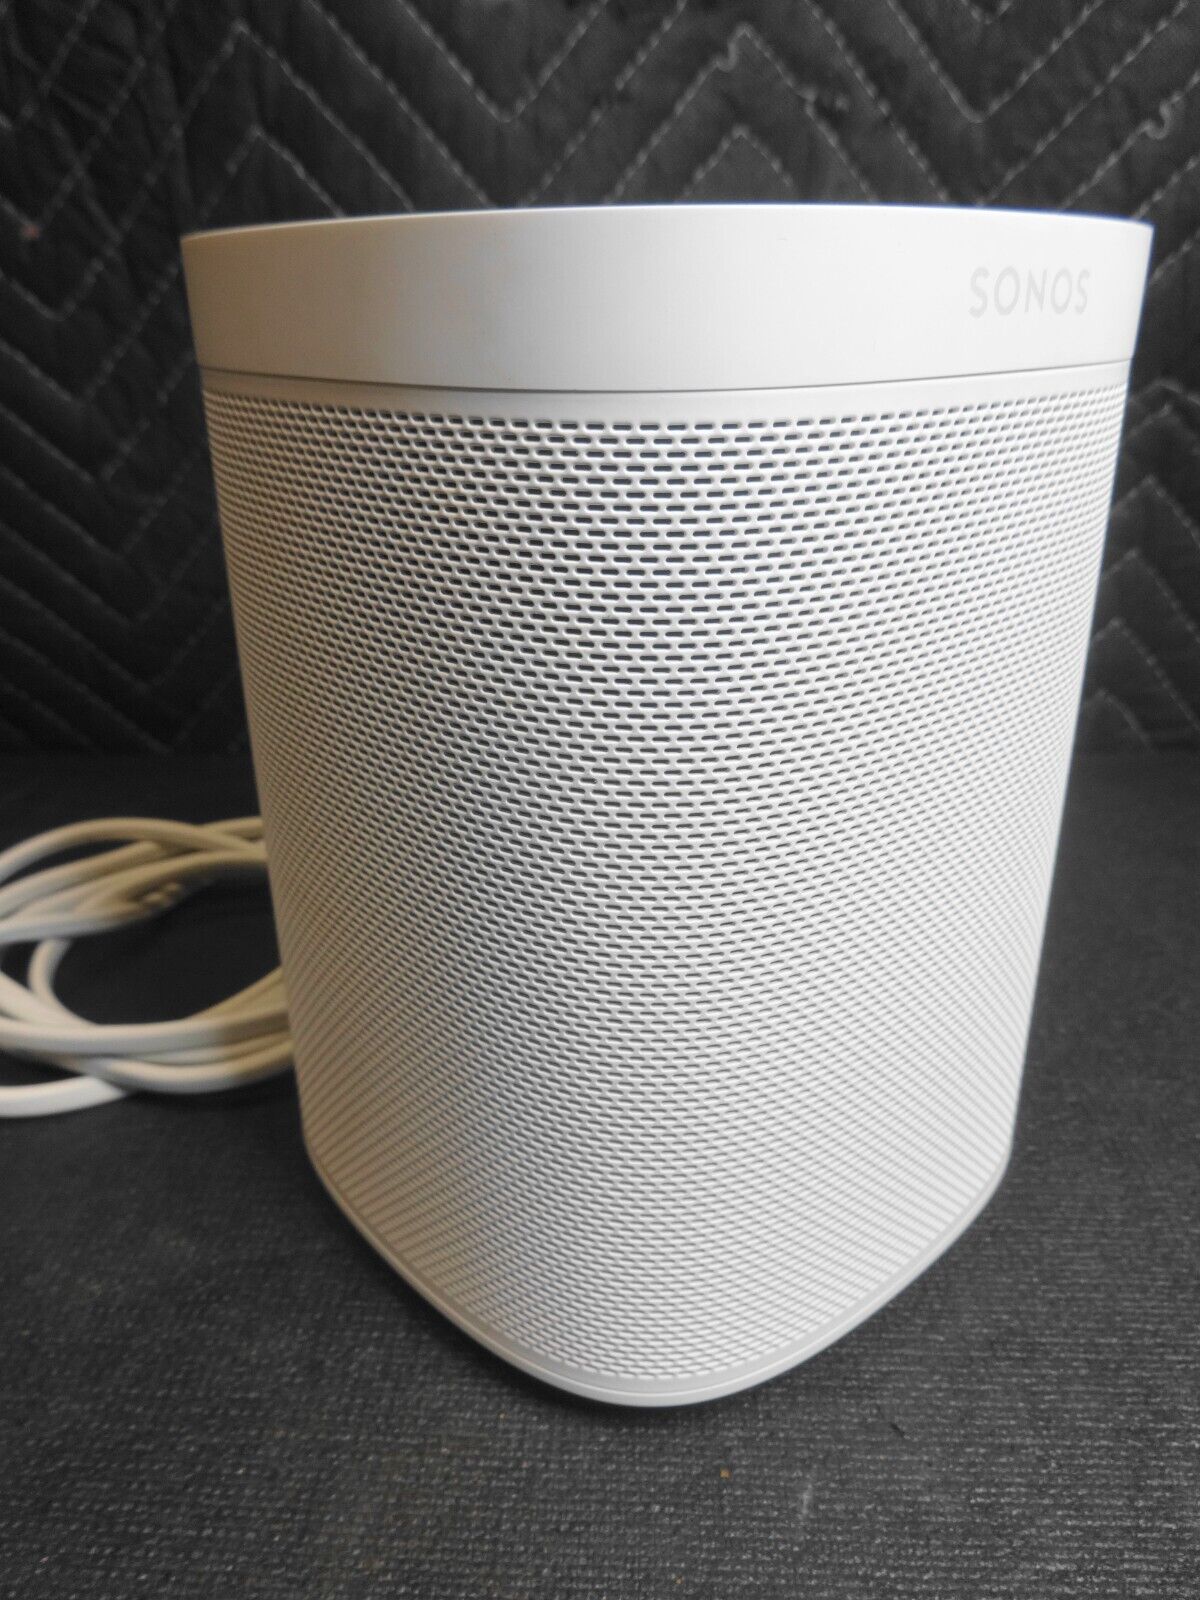 Sonos Speaker Model A100 S13 in White with Power Cord